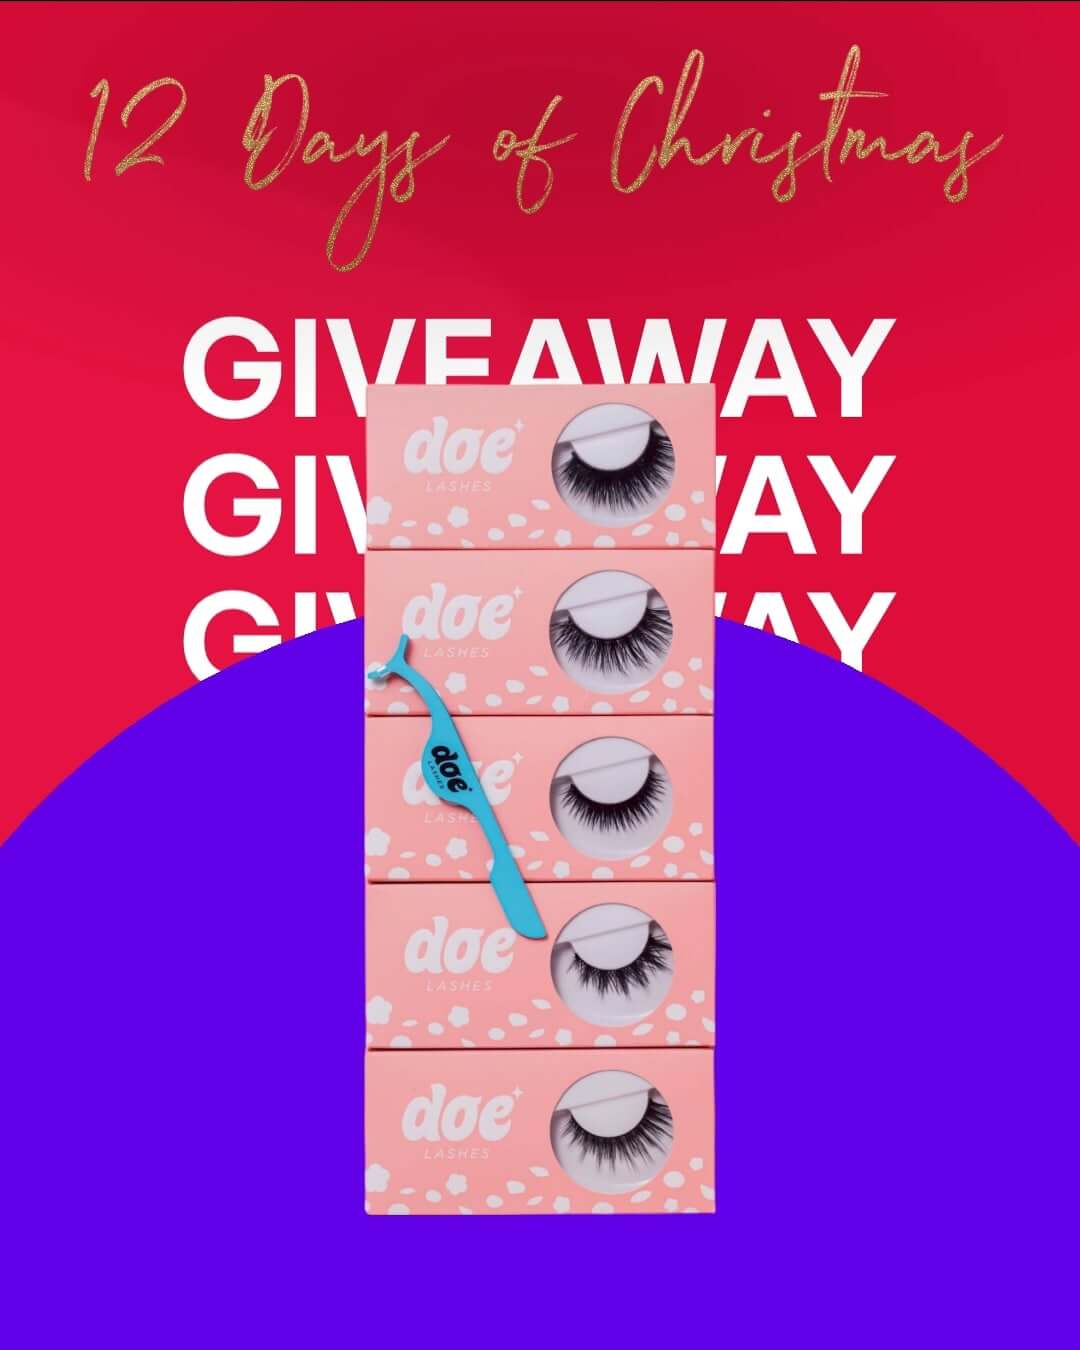 What you can win: Glam Starter Pack from Doe Lashes!